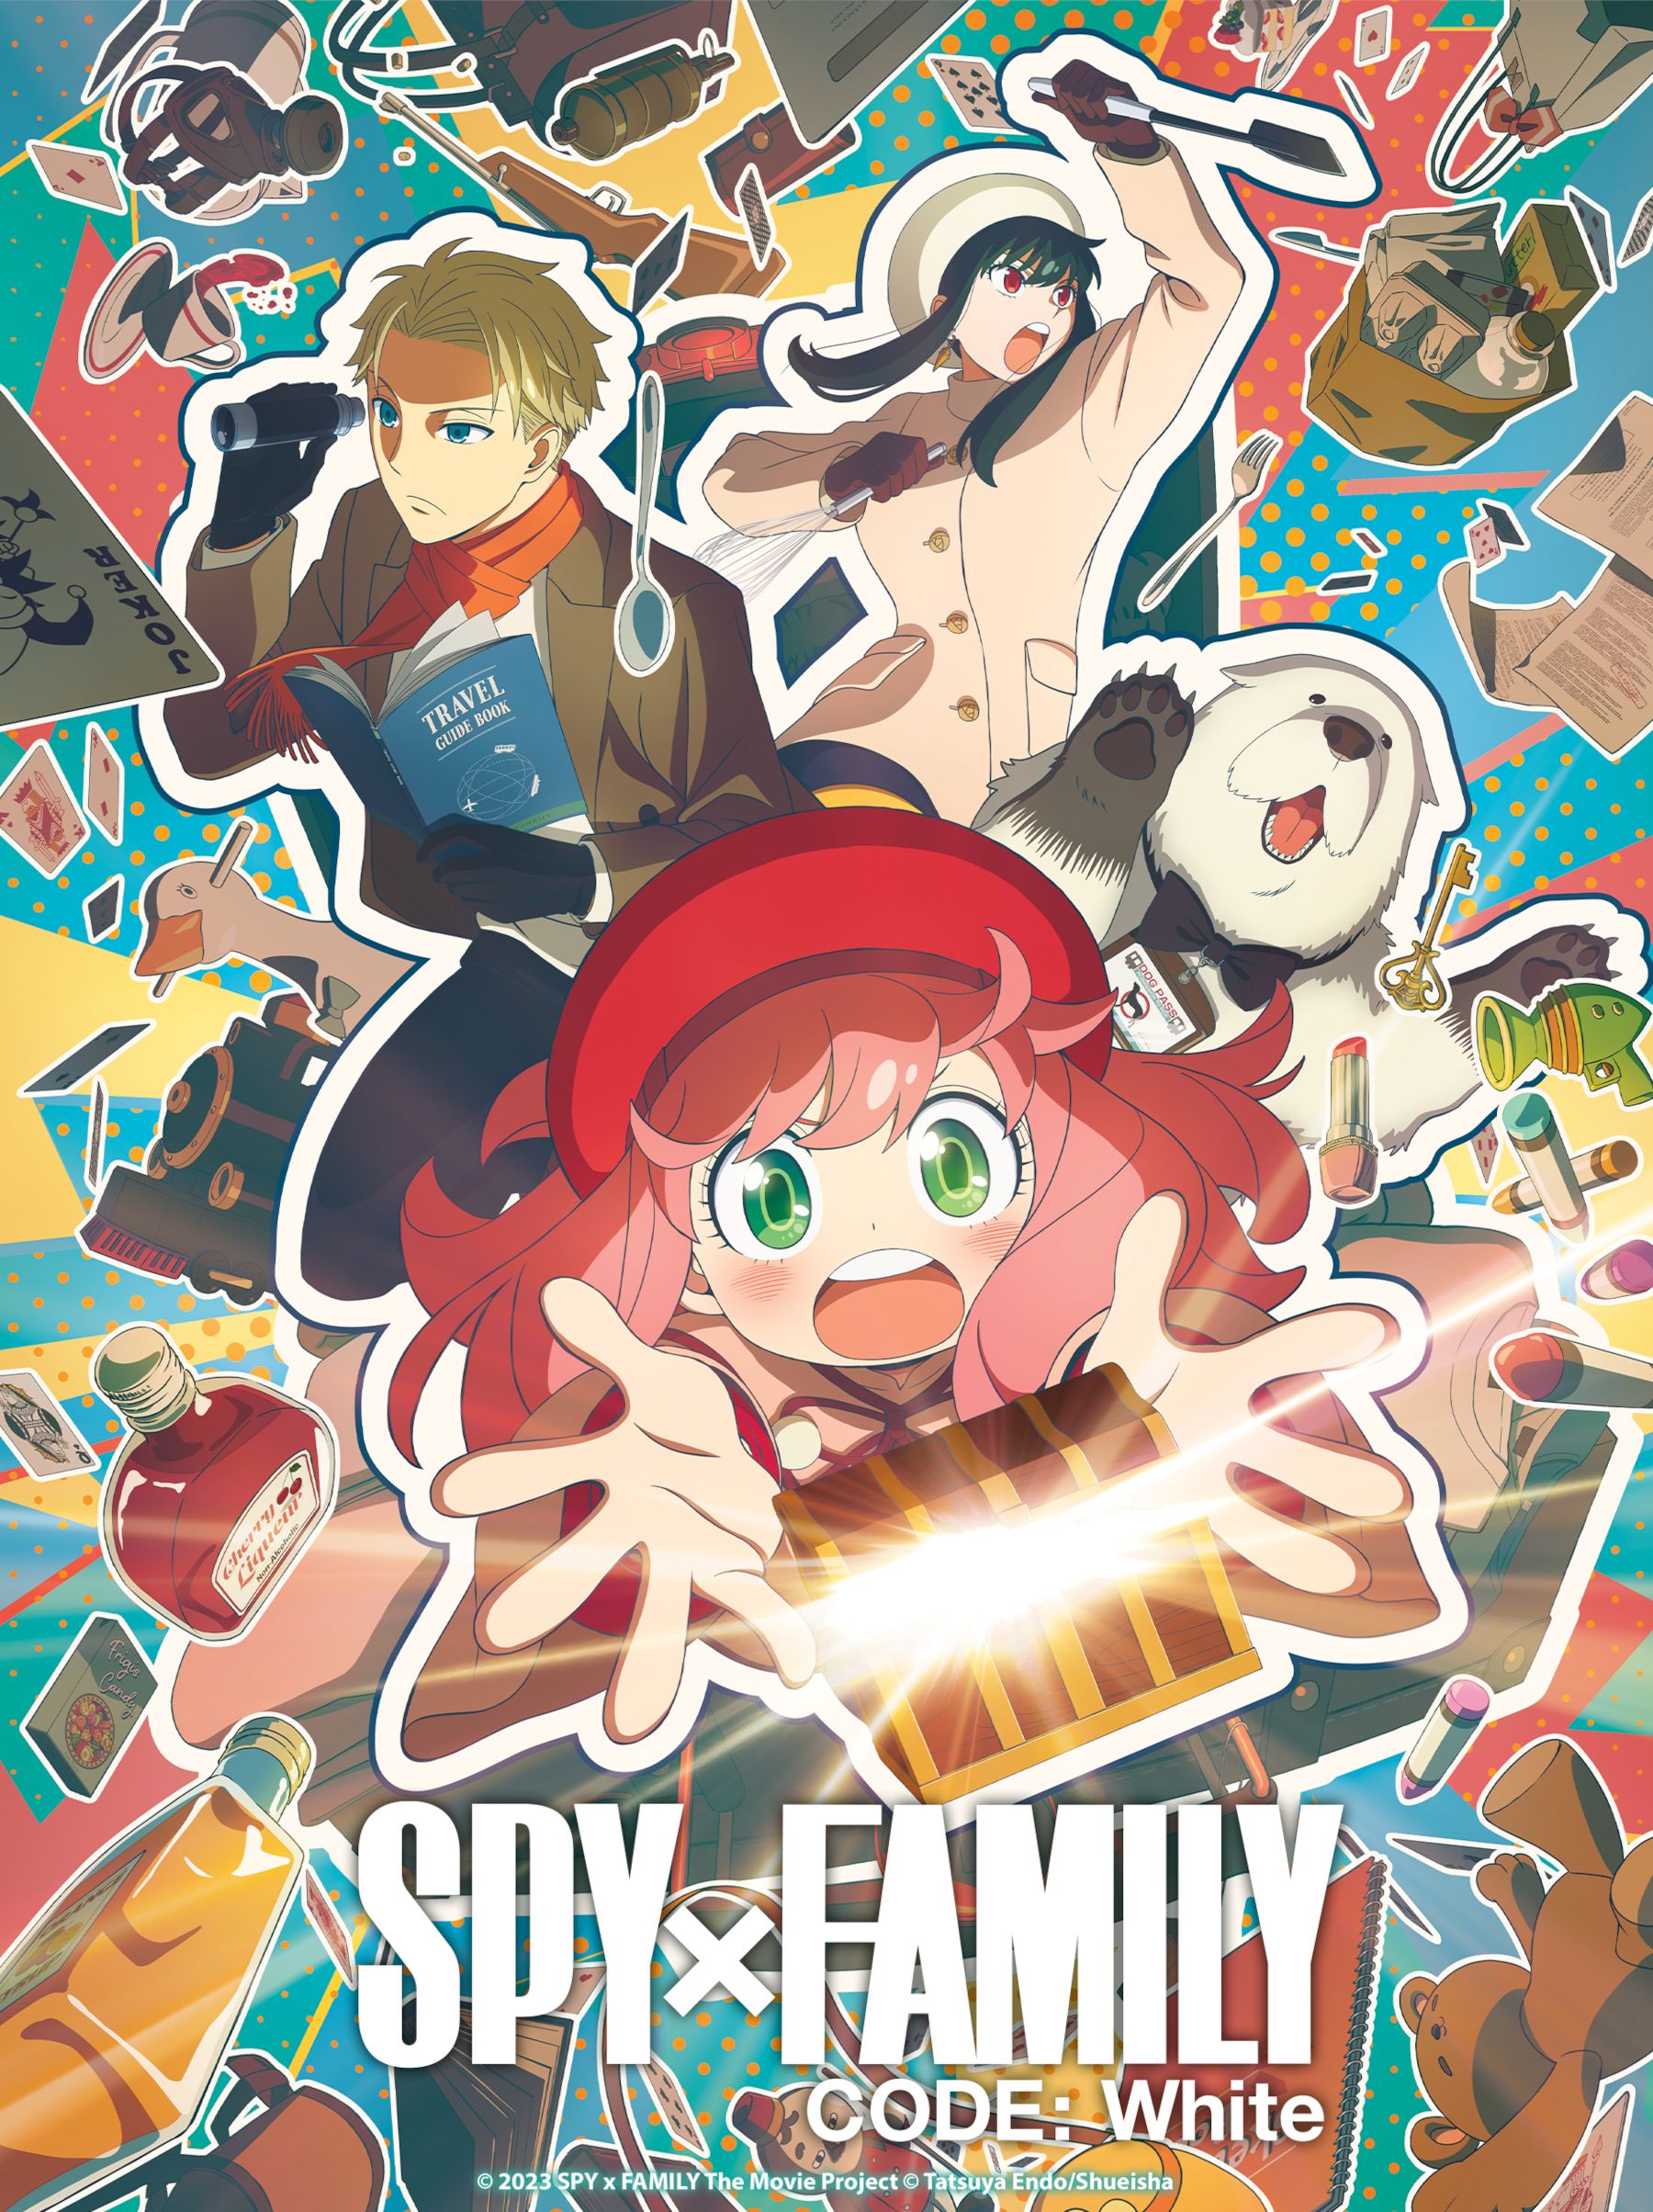 SPY x FAMILY CODE White Movie Poster Art shows Anya trying to grab a glowing treasure chest, while her family Loid, Yor, and Bond the dog are behind her with a colorful background.